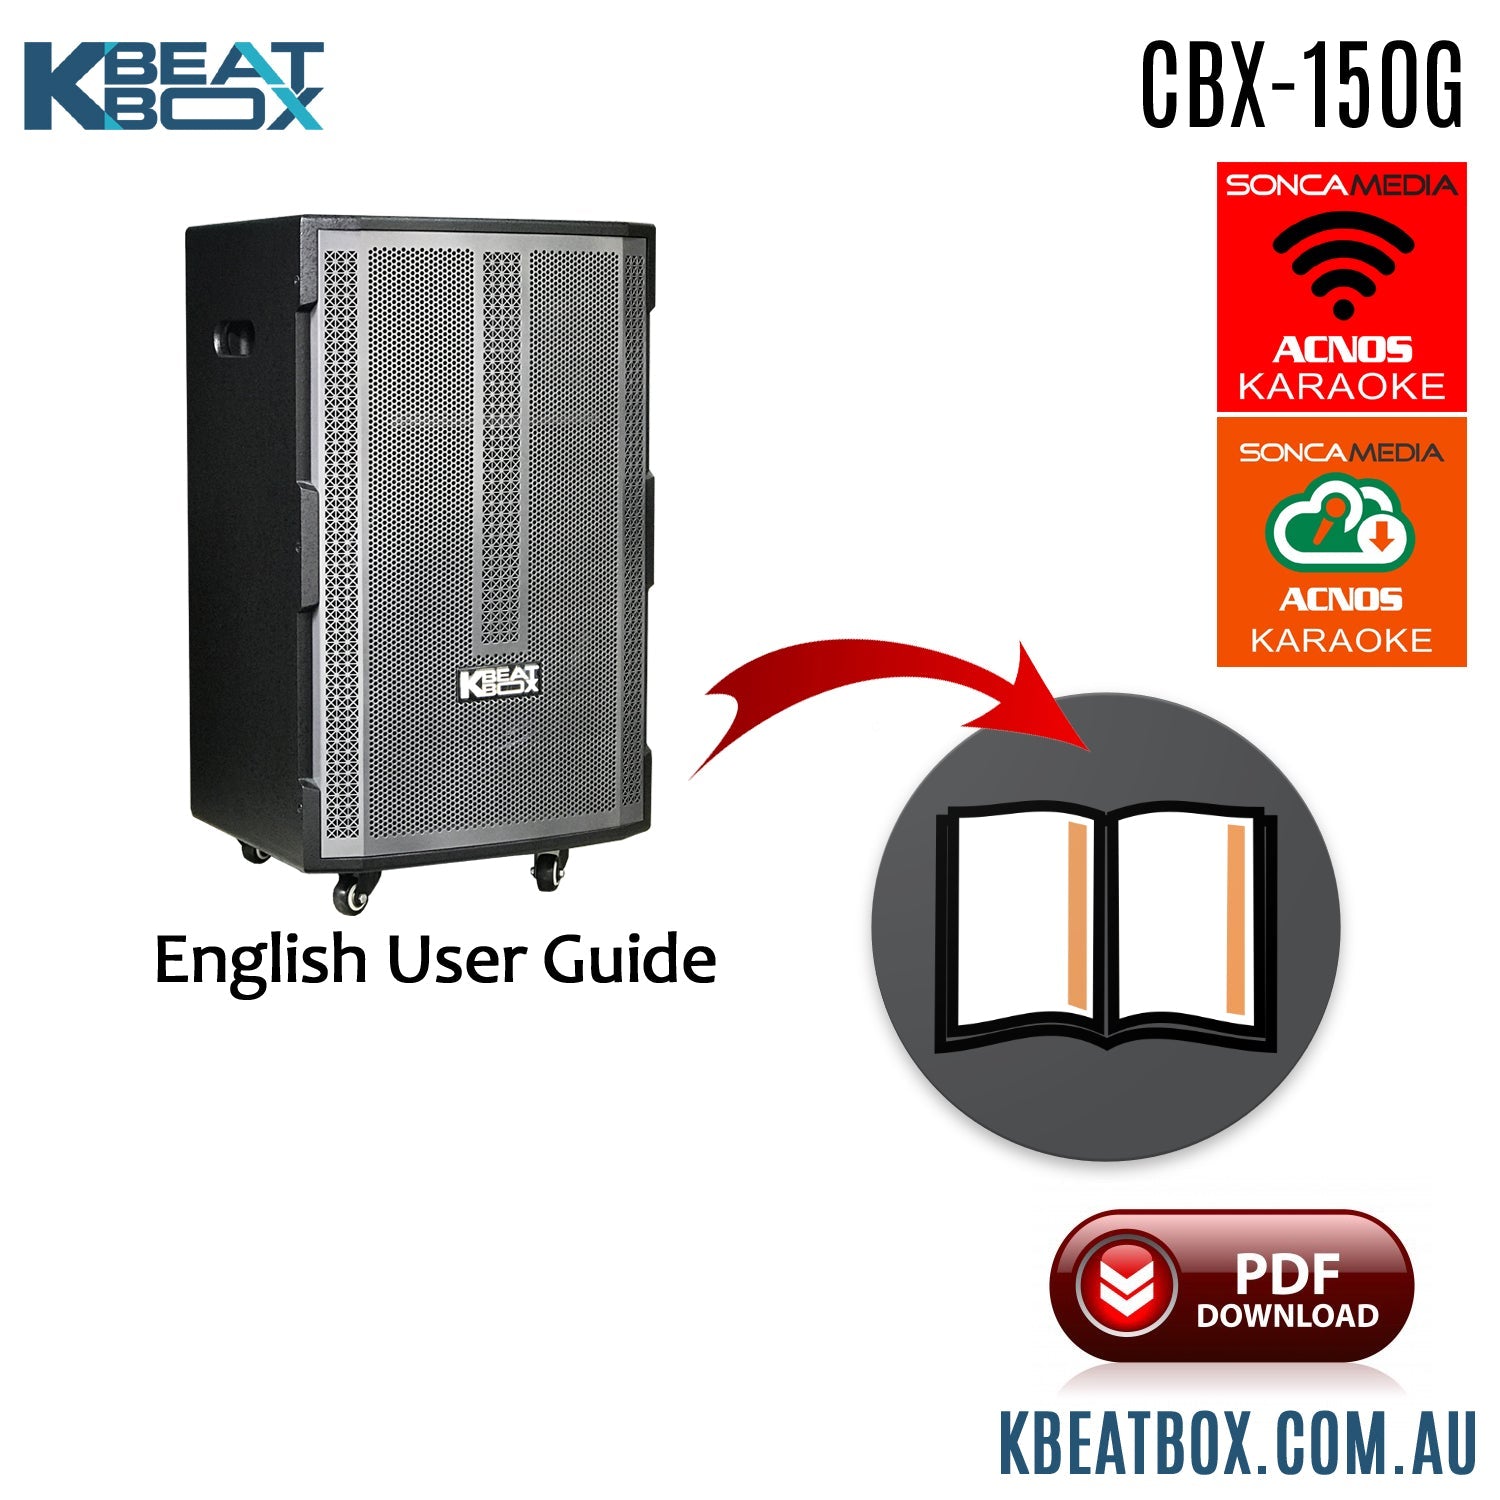 How To Connect Guide - KBeatBox CBX-150G - Karaoke Home Entertainment